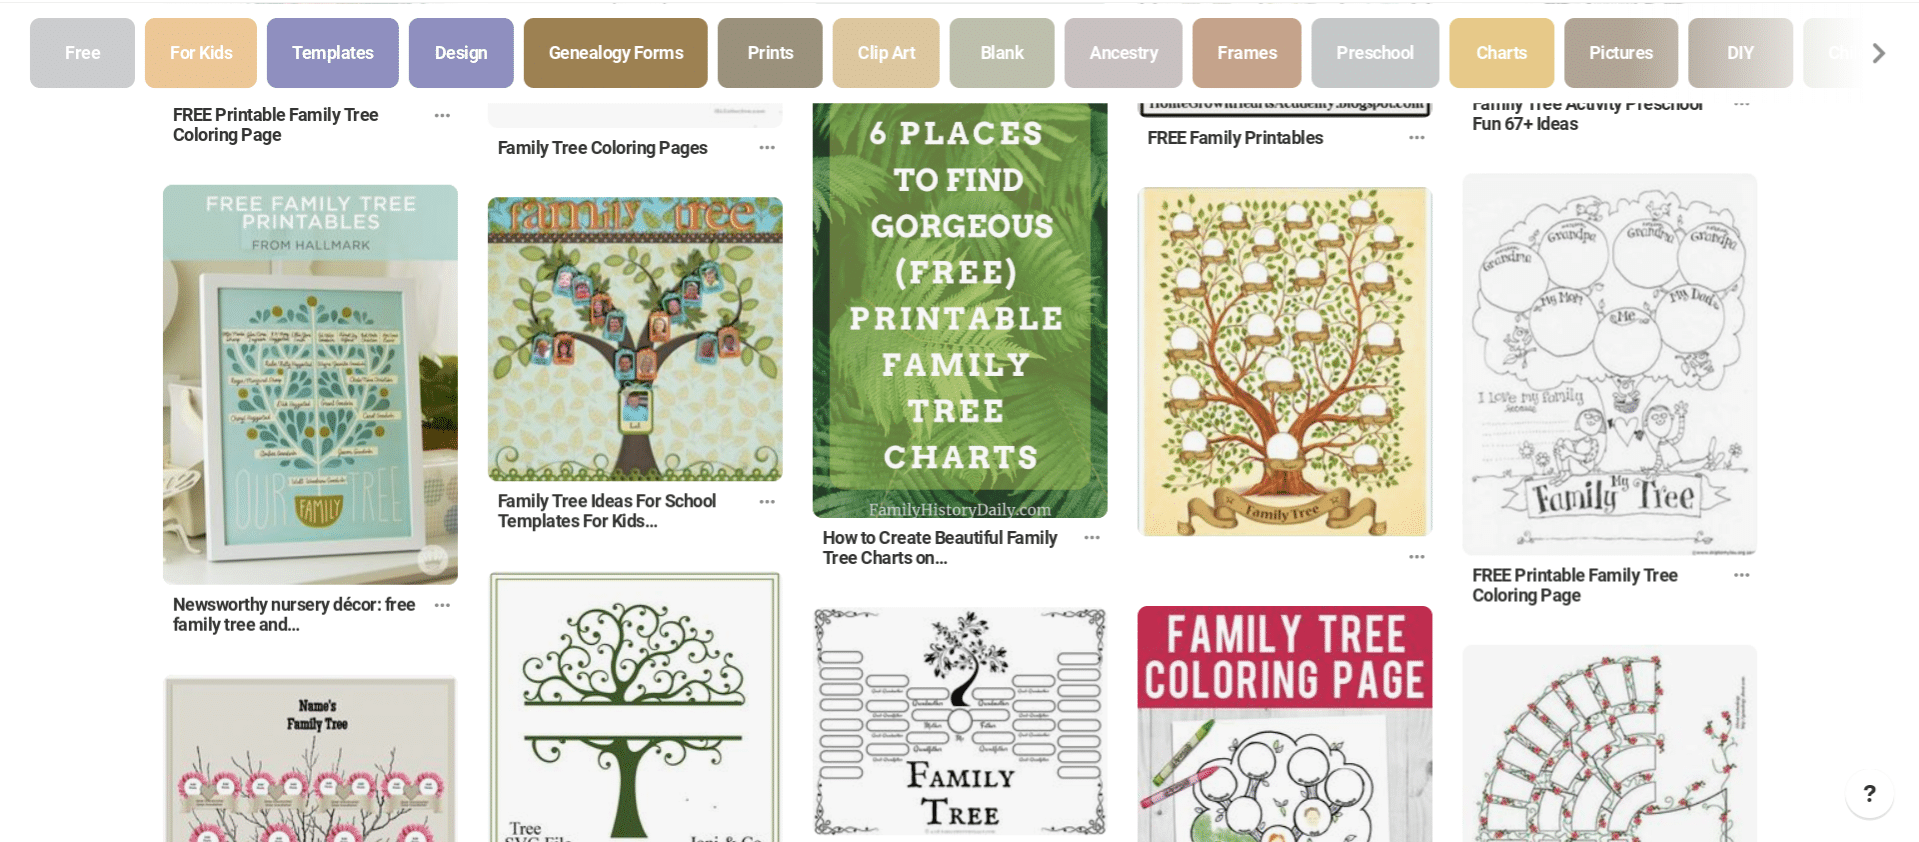 Genealogy Organizer: Book for recording your family tree history